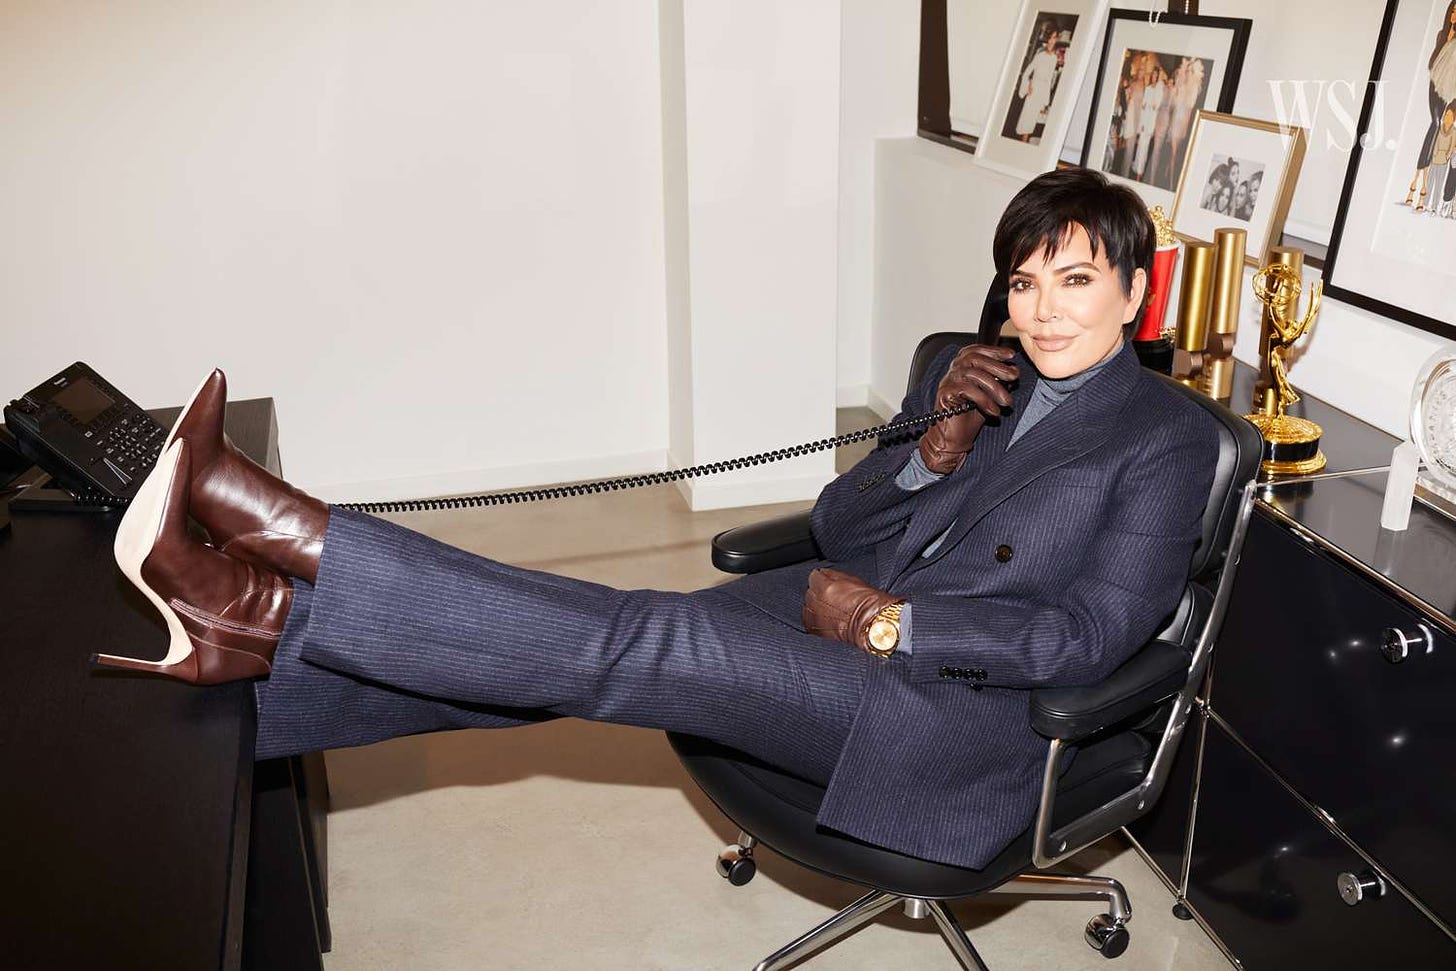 Kris Jenner Says She Misses Home Shared with Late Husband Robert  Kardashian: 'Wish I Could Go Back' - happy LifeStyle inc